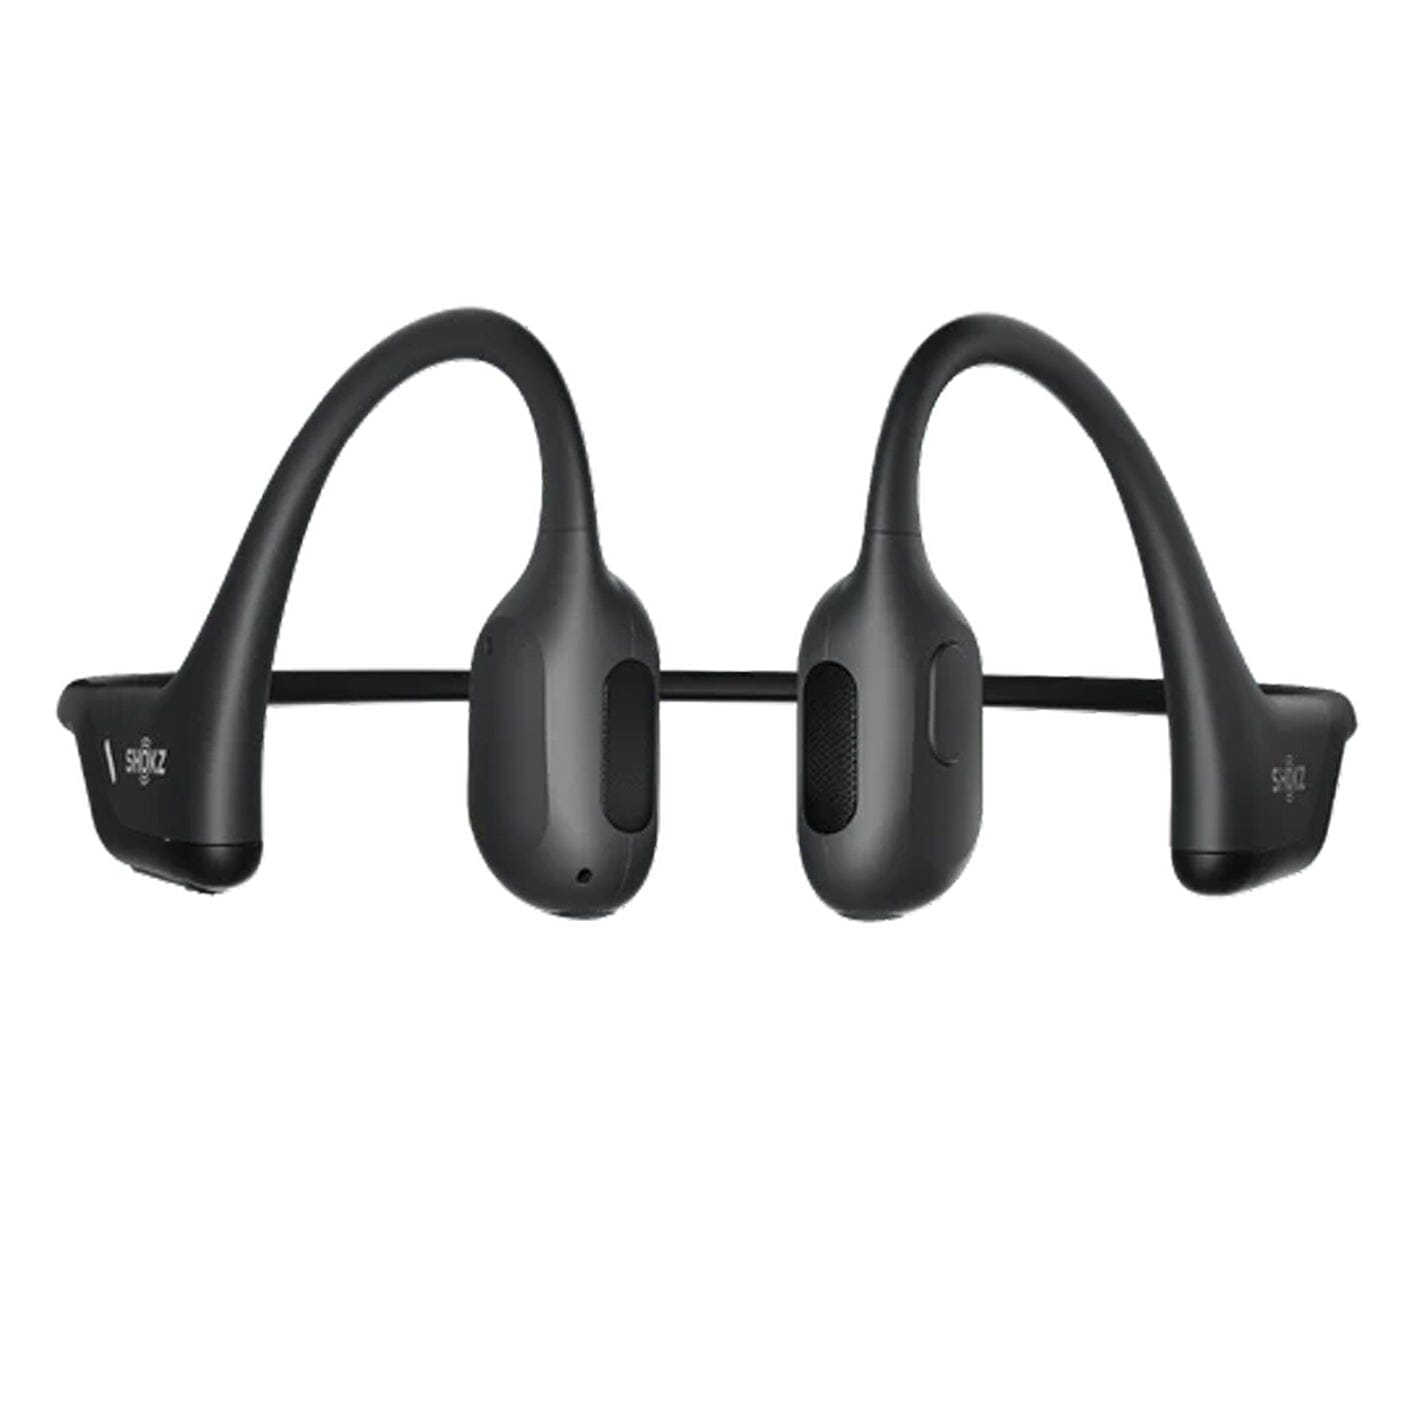 SHOKZ OpenRun Pro Mini - Premium Bone Conduction Open-Ear Bluetooth Sport Headphones - Sweat Resistant Wireless Earphones for Workouts and Running with Deep Base - Built-in Mic, with Headband ONE2WORLD Black 